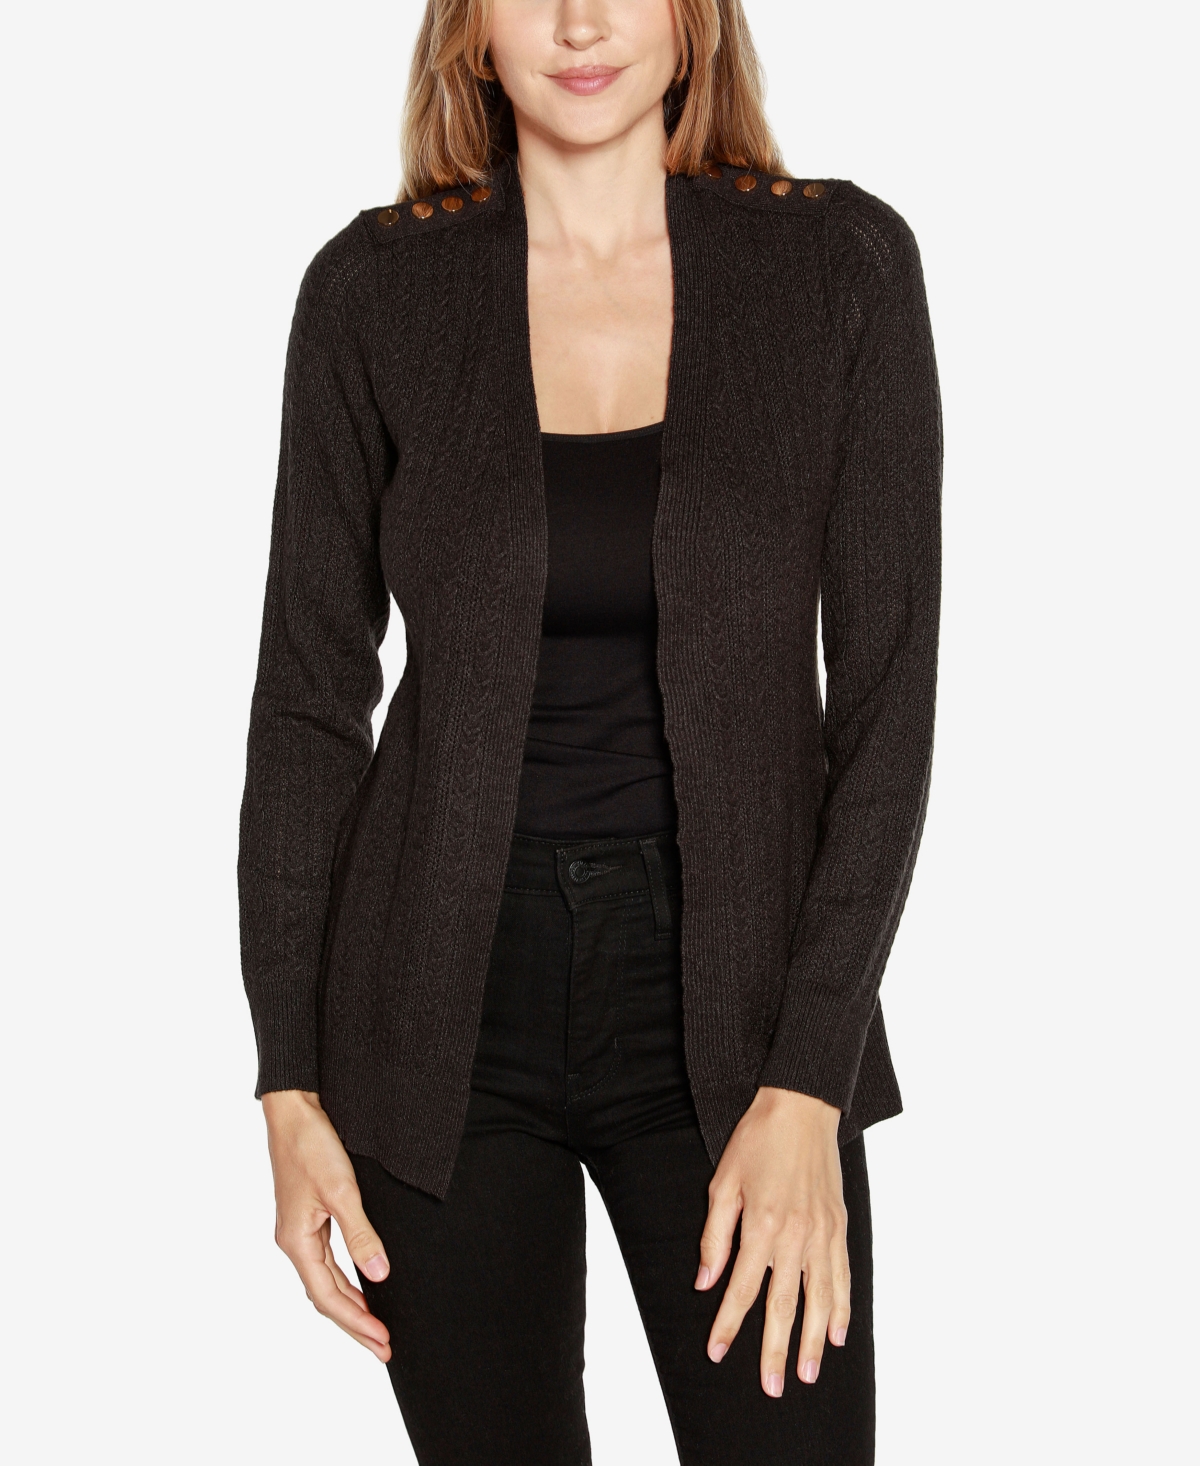 Belldini Black Label Women's Open Front Cable Knit Cardigan Sweater In Heather Charcoal